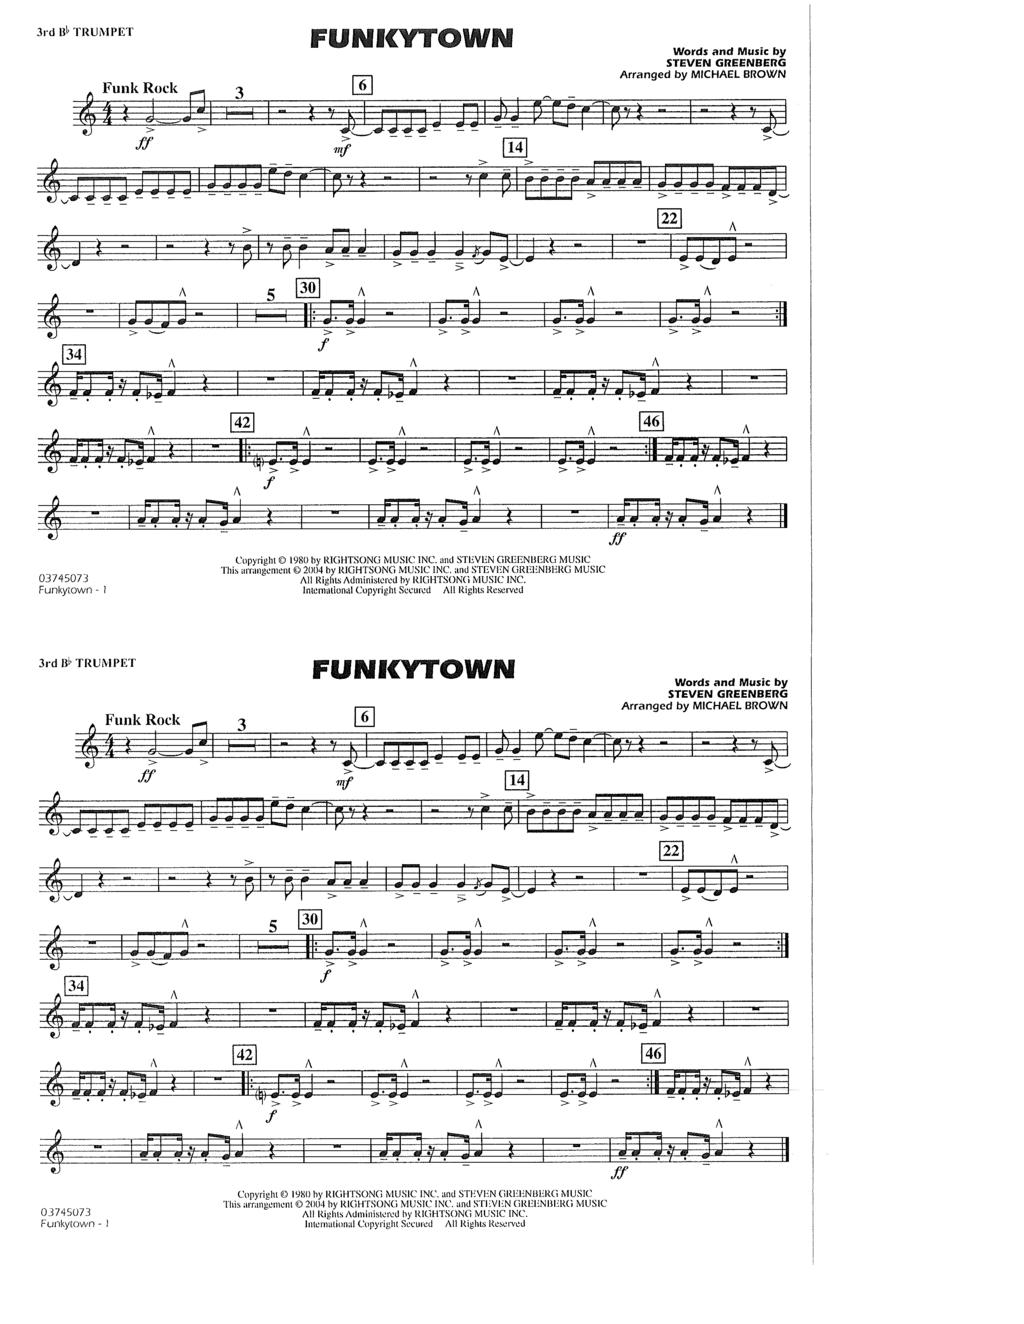 3rd l!» T UMPET FUWIC OWW STEVEN GREE BERG > 0374507 Funkytown - Copyright 1980 by RIGHTSONG MUSIC INC.